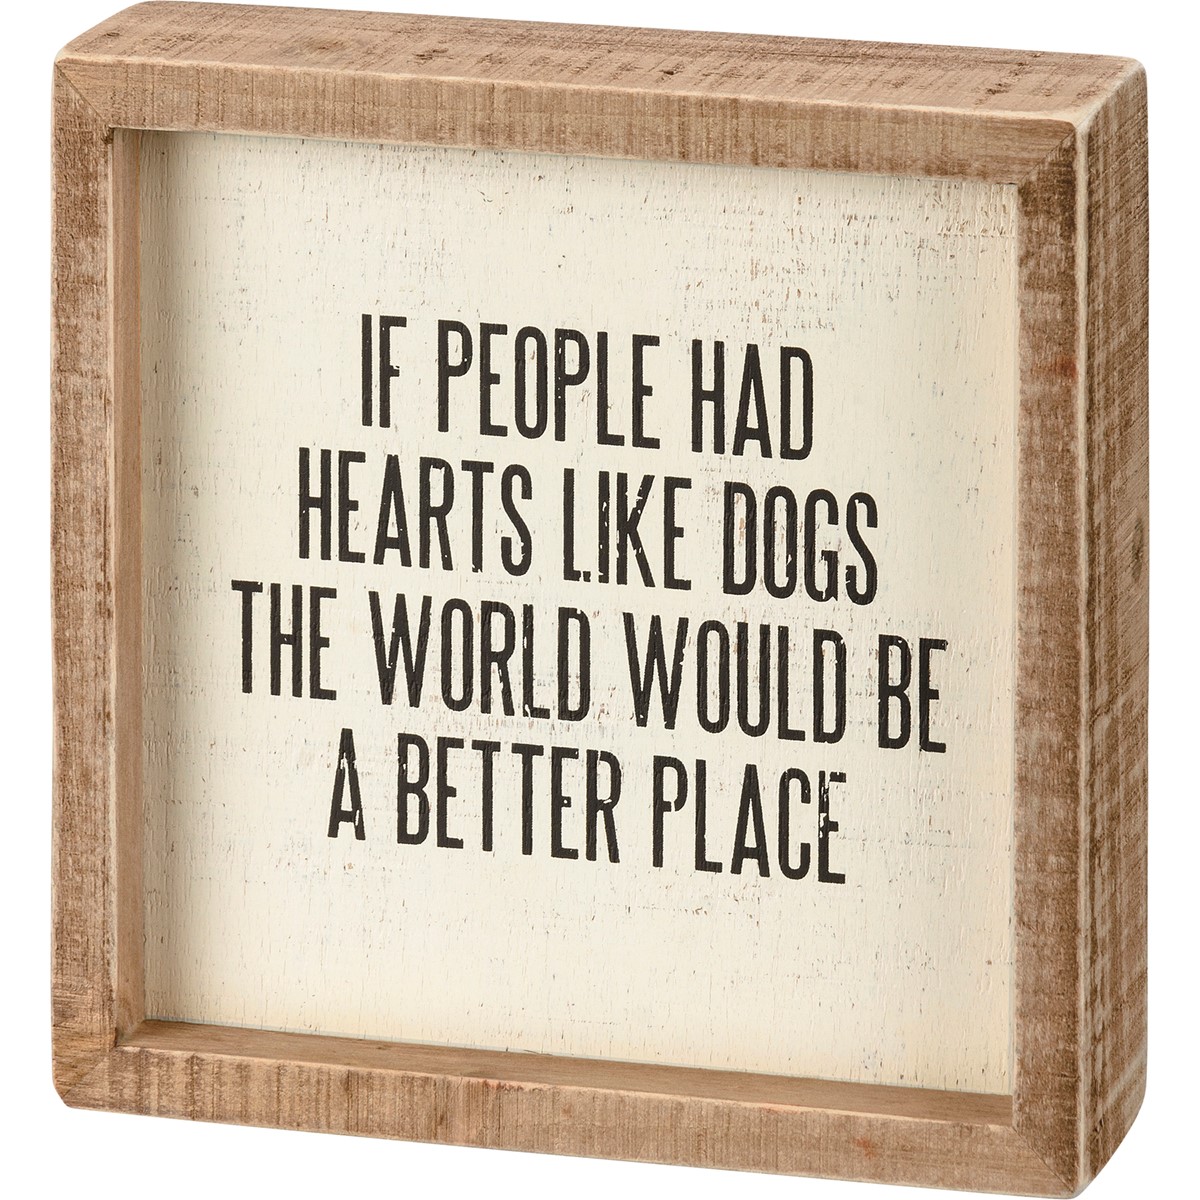 If People Had Hearts Like Dogs Inset Box Sign - Wood